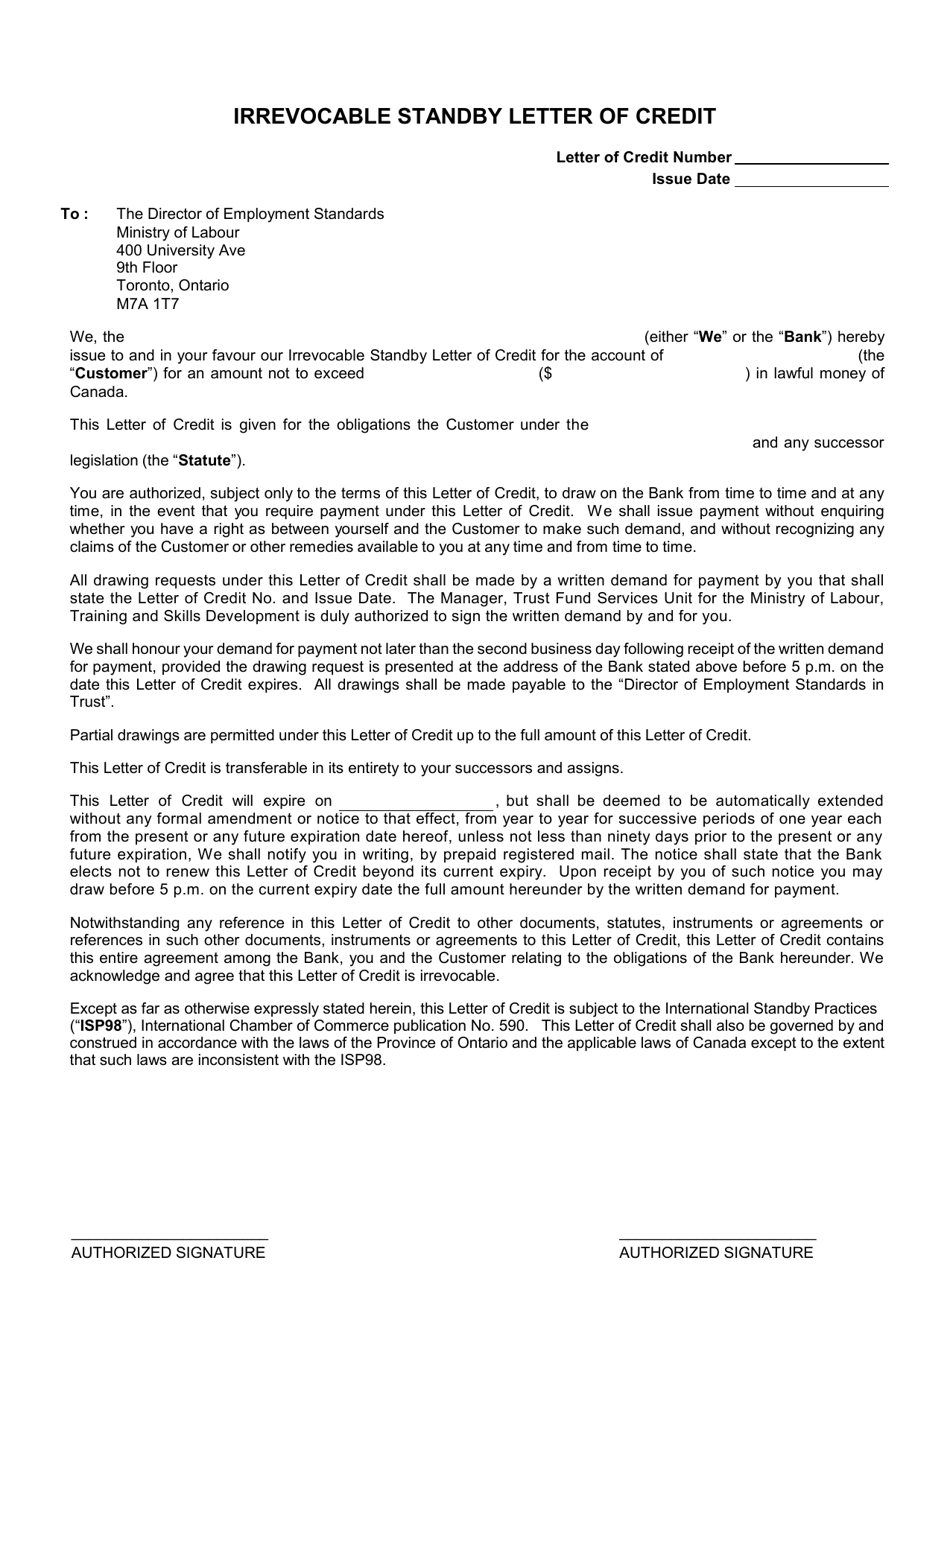 Irrevocable Standby Letter of Credit - Ontario, Canada, Page 1